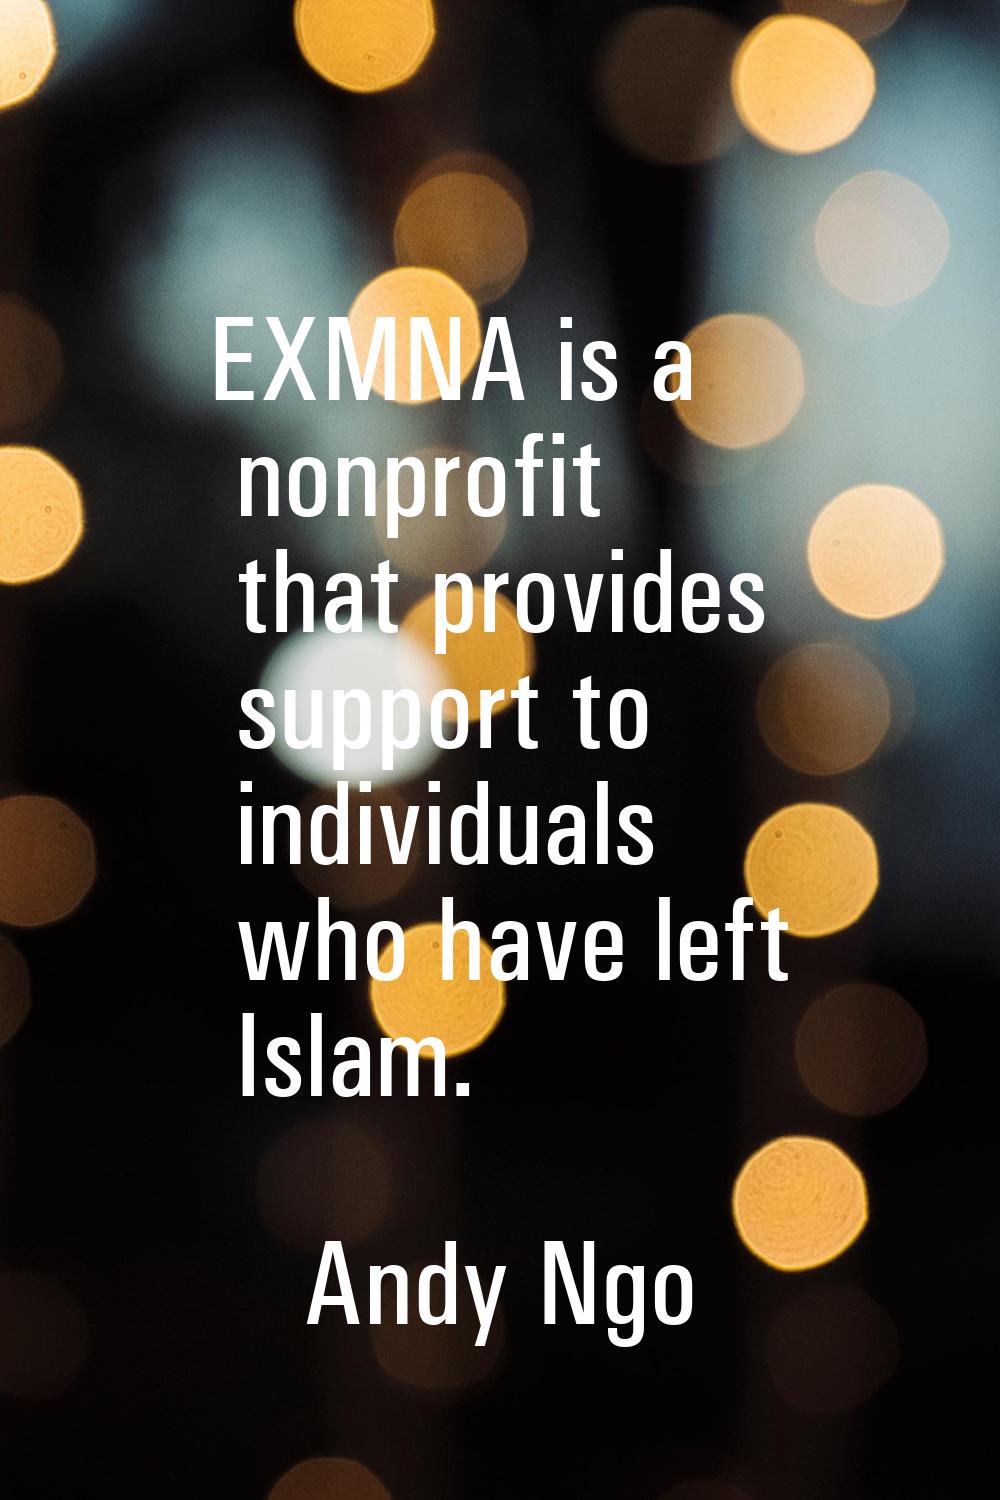 EXMNA is a nonprofit that provides support to individuals who have left Islam.